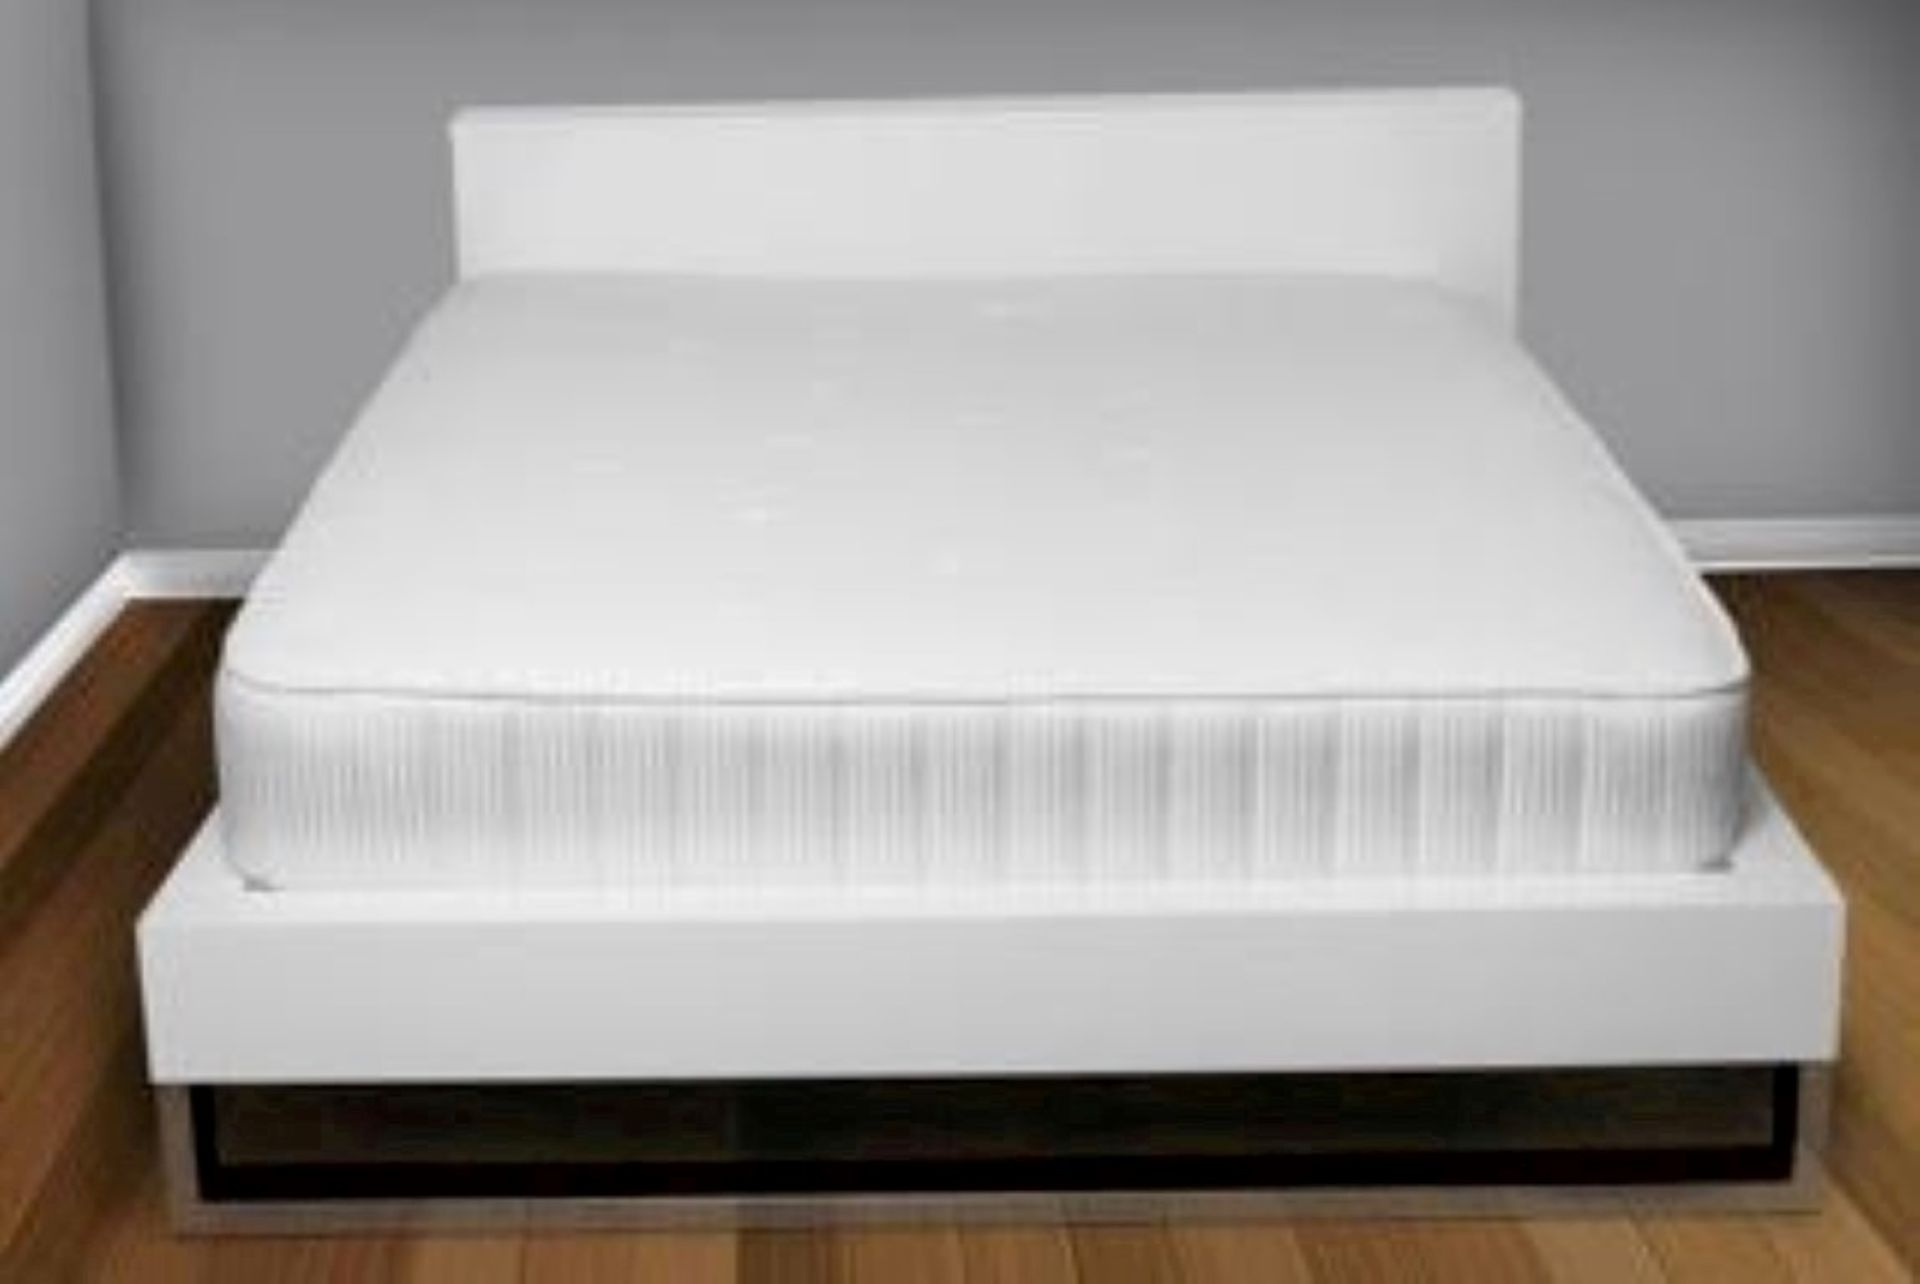 Tenzo Scala Designer 4ft6” Double Bed With Storage Headboard - White Gloss & Chrome - Brand New & - Image 3 of 5